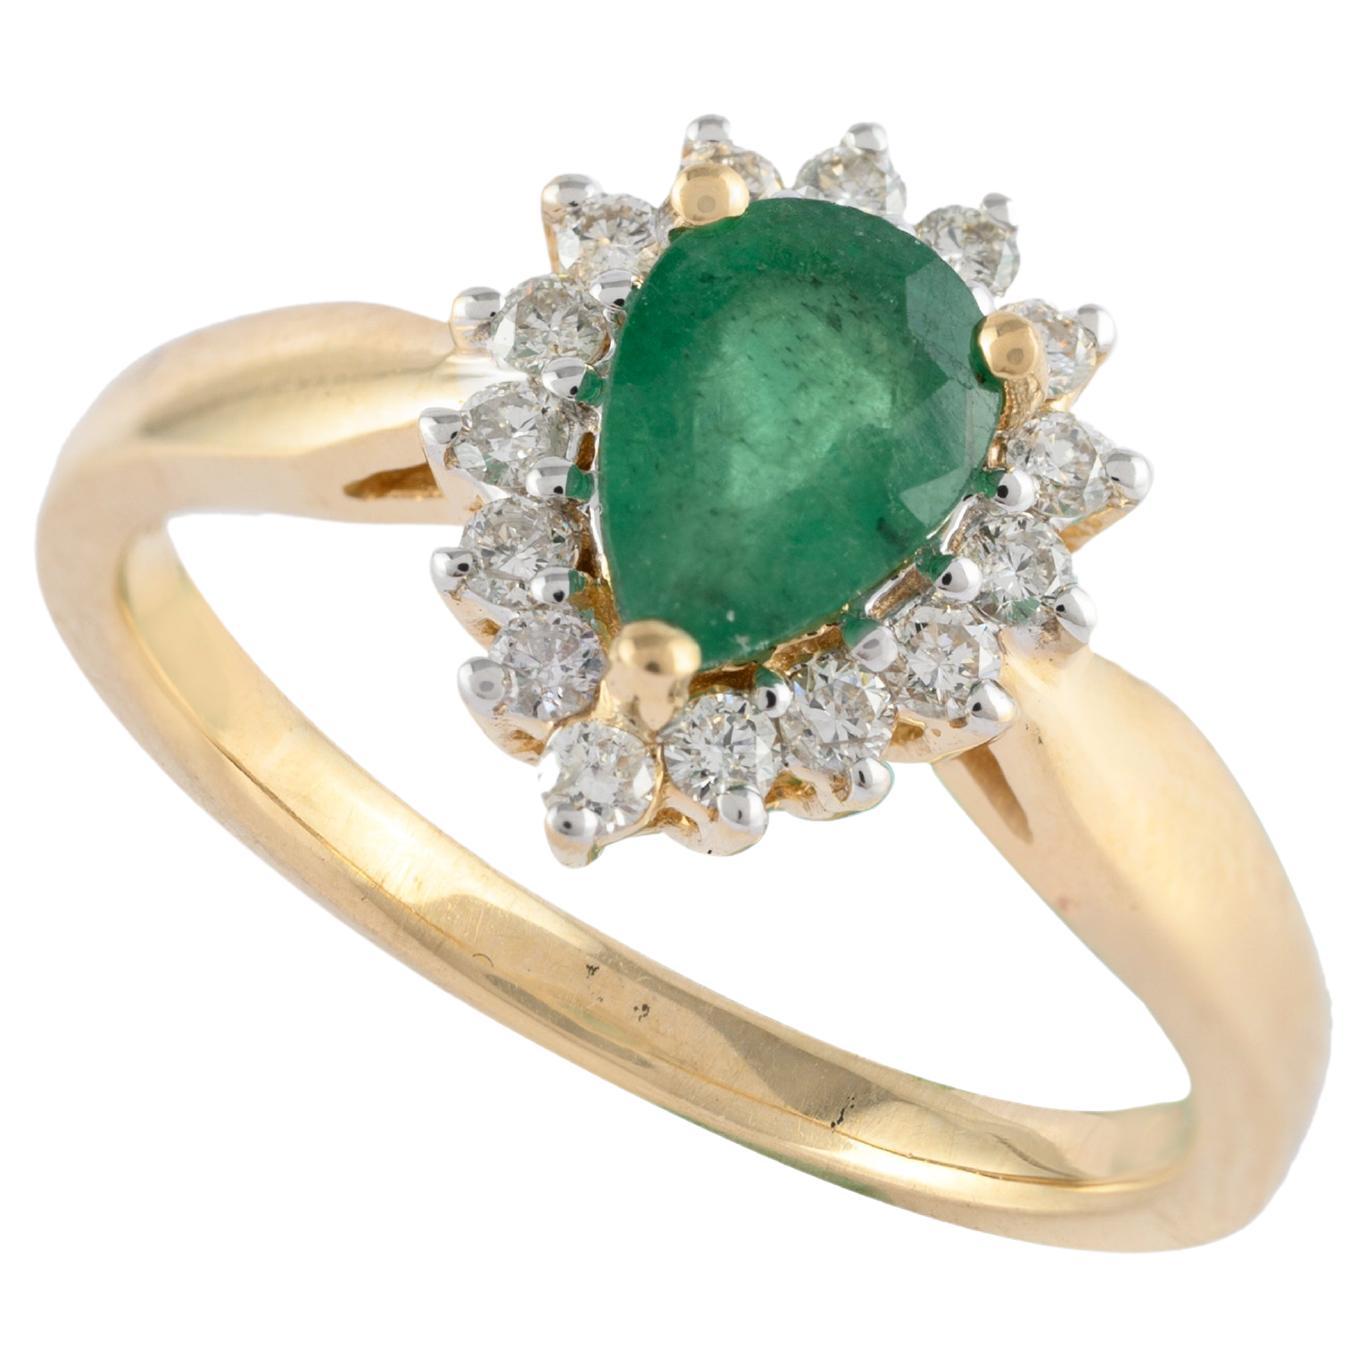 For Sale:  Pear Cut Emerald and Halo Diamond Wedding Ring Crafted in 14k Solid Yellow Gold